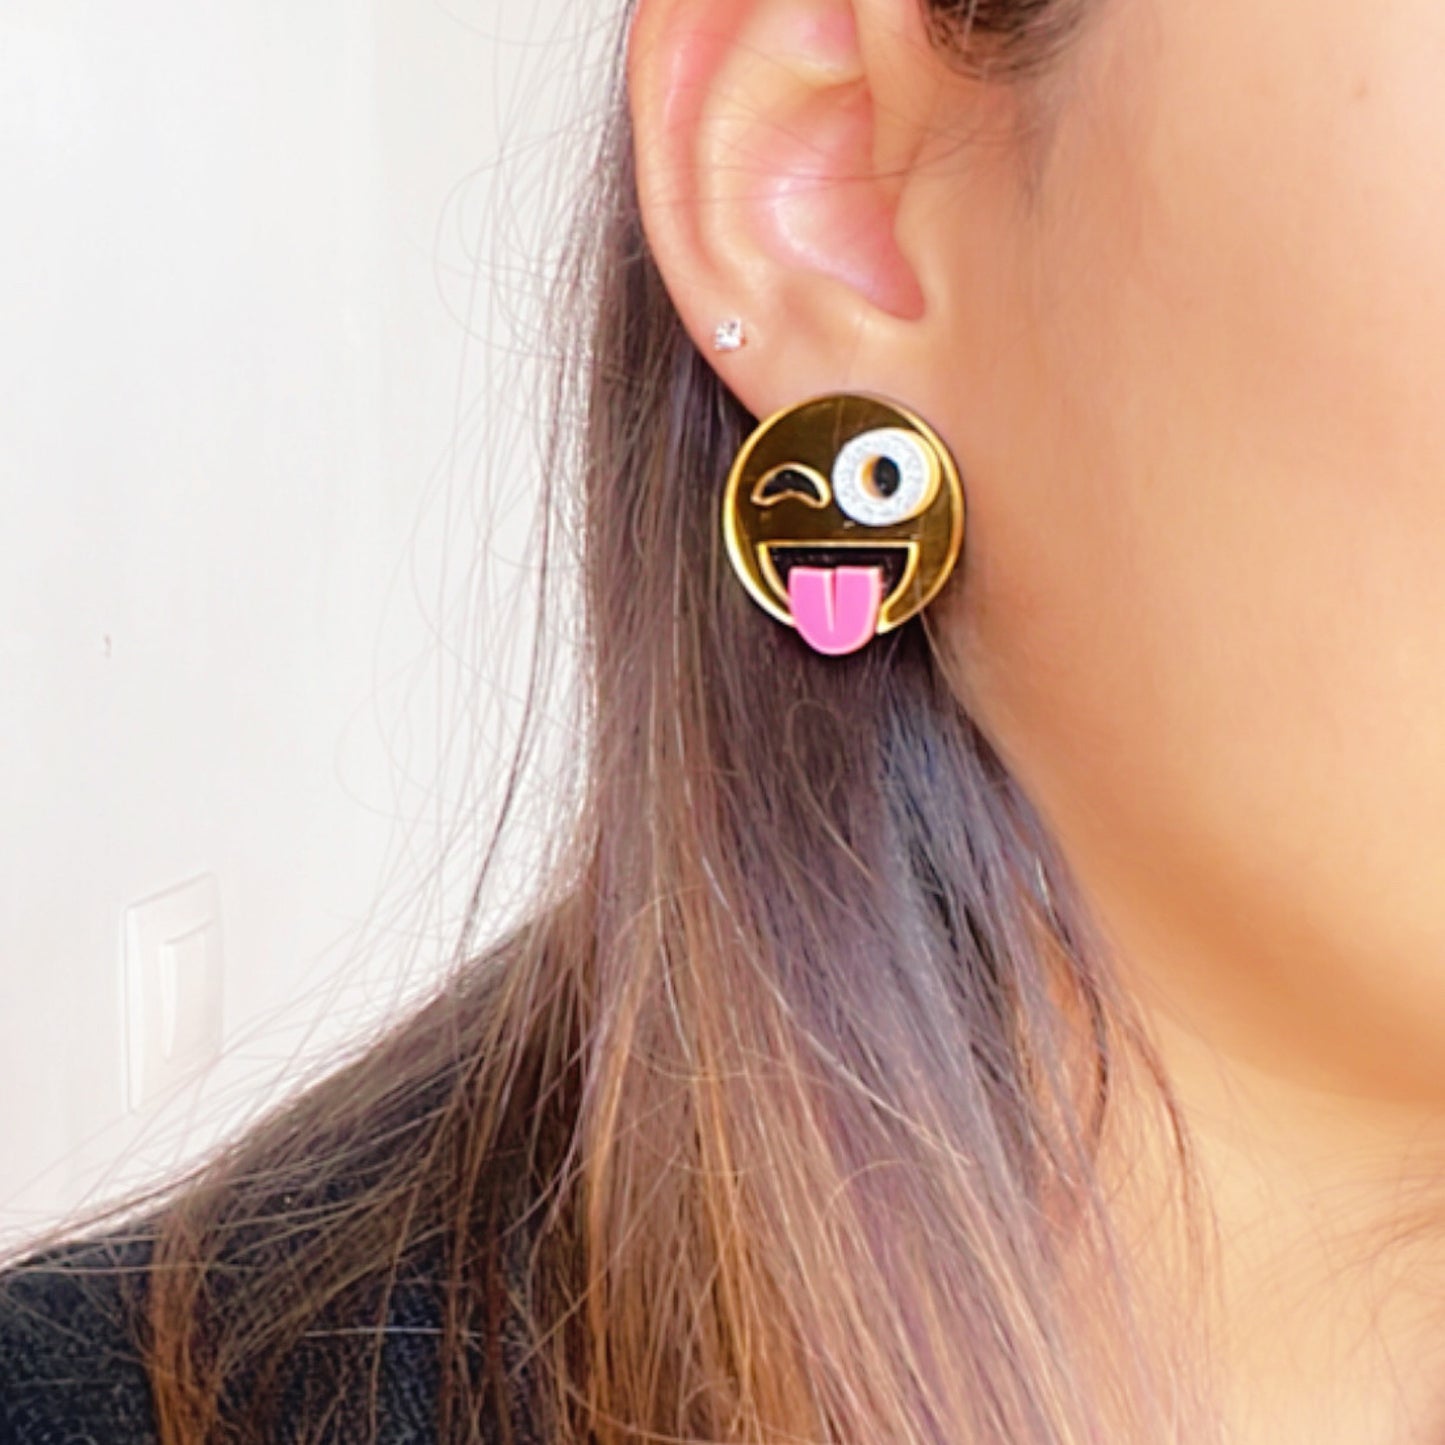 Goofy Emoji Studs - Golden with face detailings - Nian by Nidhi - worn by a woman